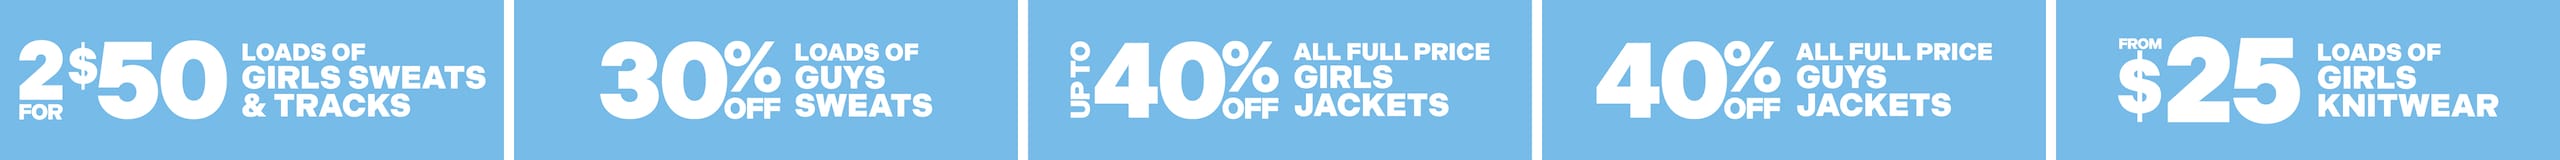 2 For $50 Loads Of Girls Sweats & Tracks. 30% Off Loads Of Guys Sweats. Up To 40% Off All Full Price Girls Jackets. 40% Off All Full Price Guys Jackets. Loads Of Girls Knitwear From $25